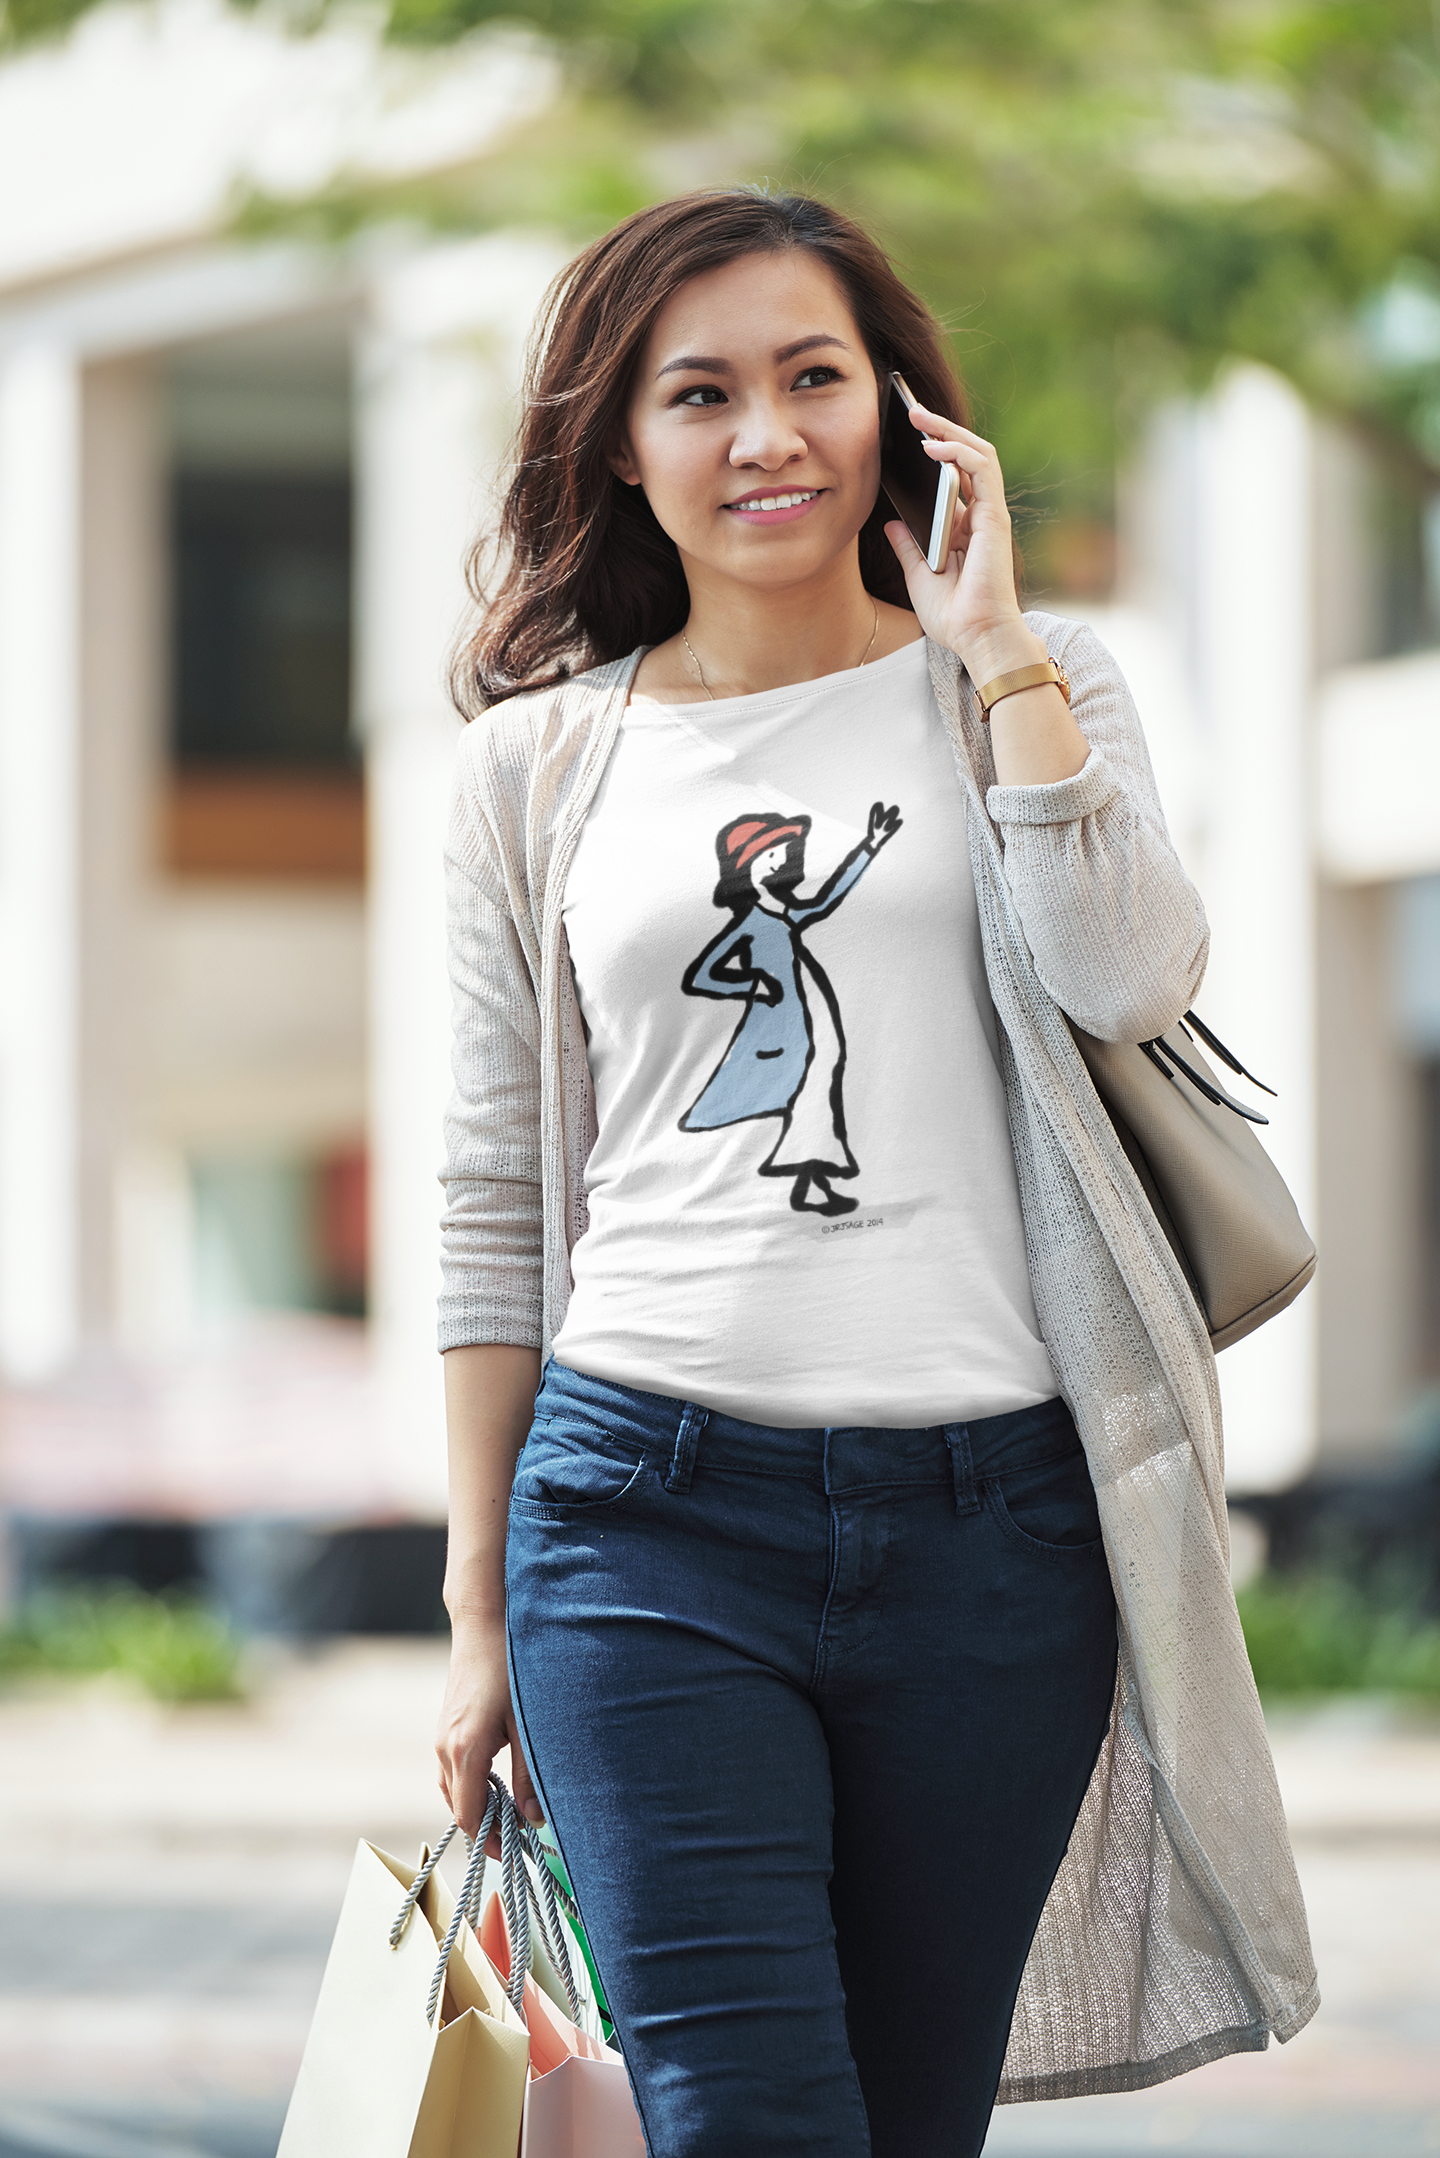 A young woman wearing a cotton t-shirt with printed illustration of a waving girl design by hector and bone